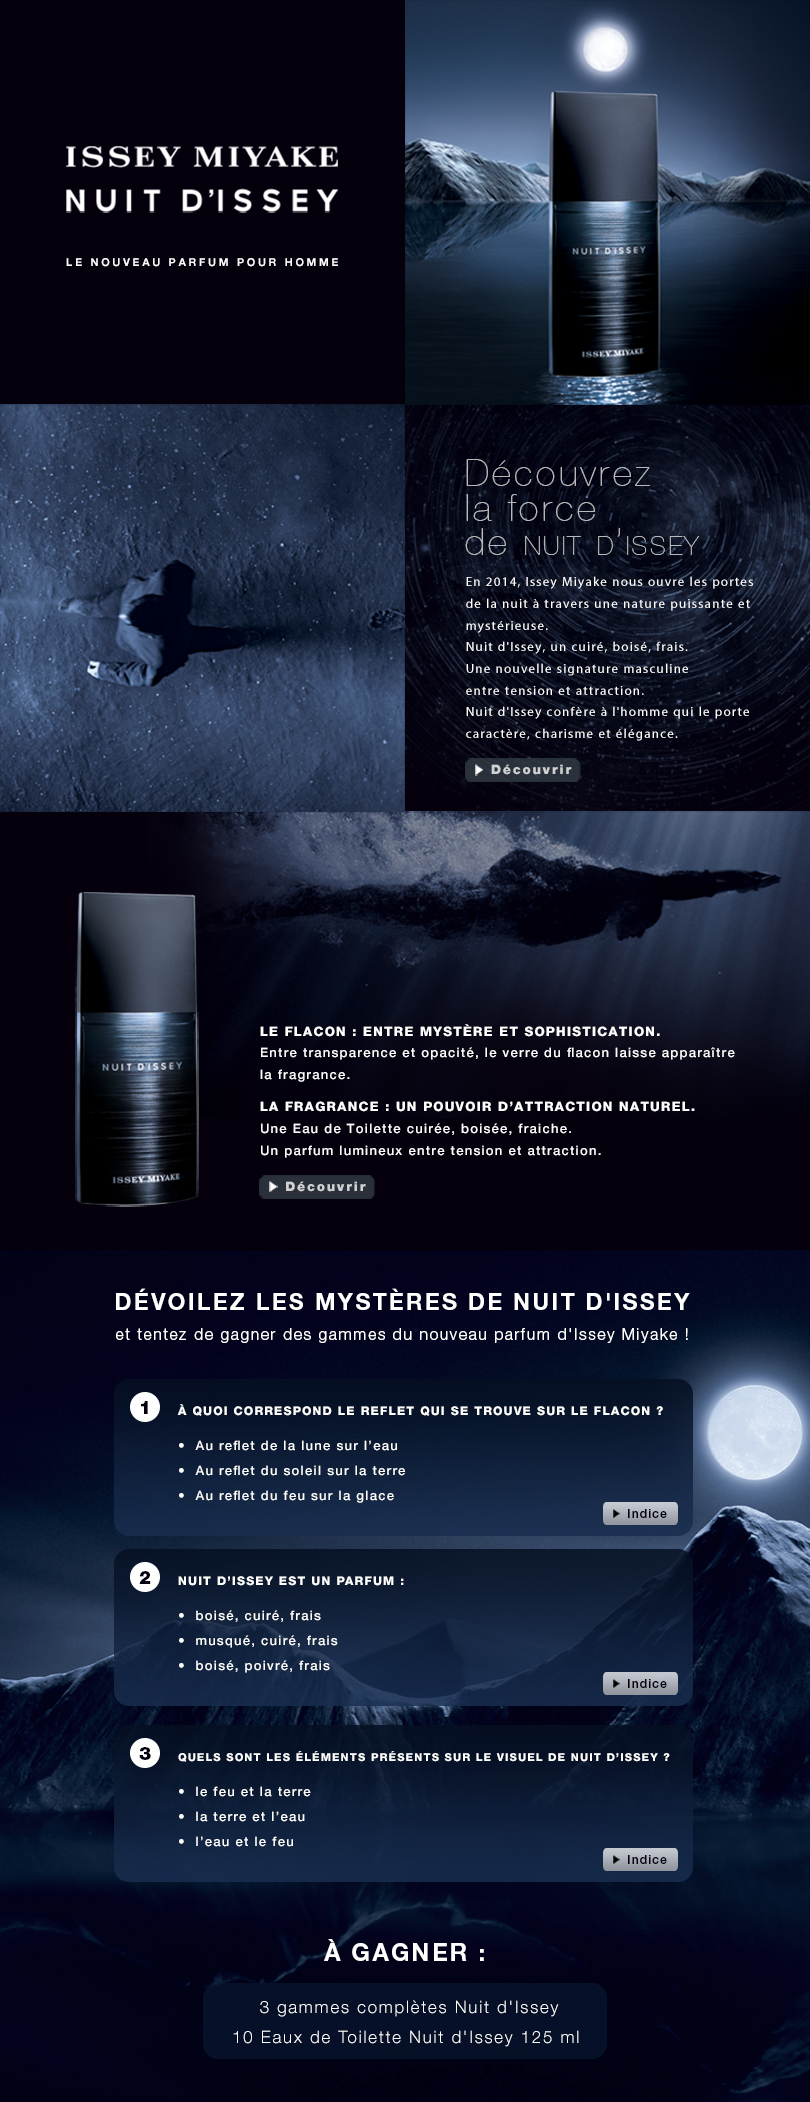 issey miyake perfume nuit d'issey nuit d'issey Attraction Nature night mysterious Experience force dive into the Nature and sky will become